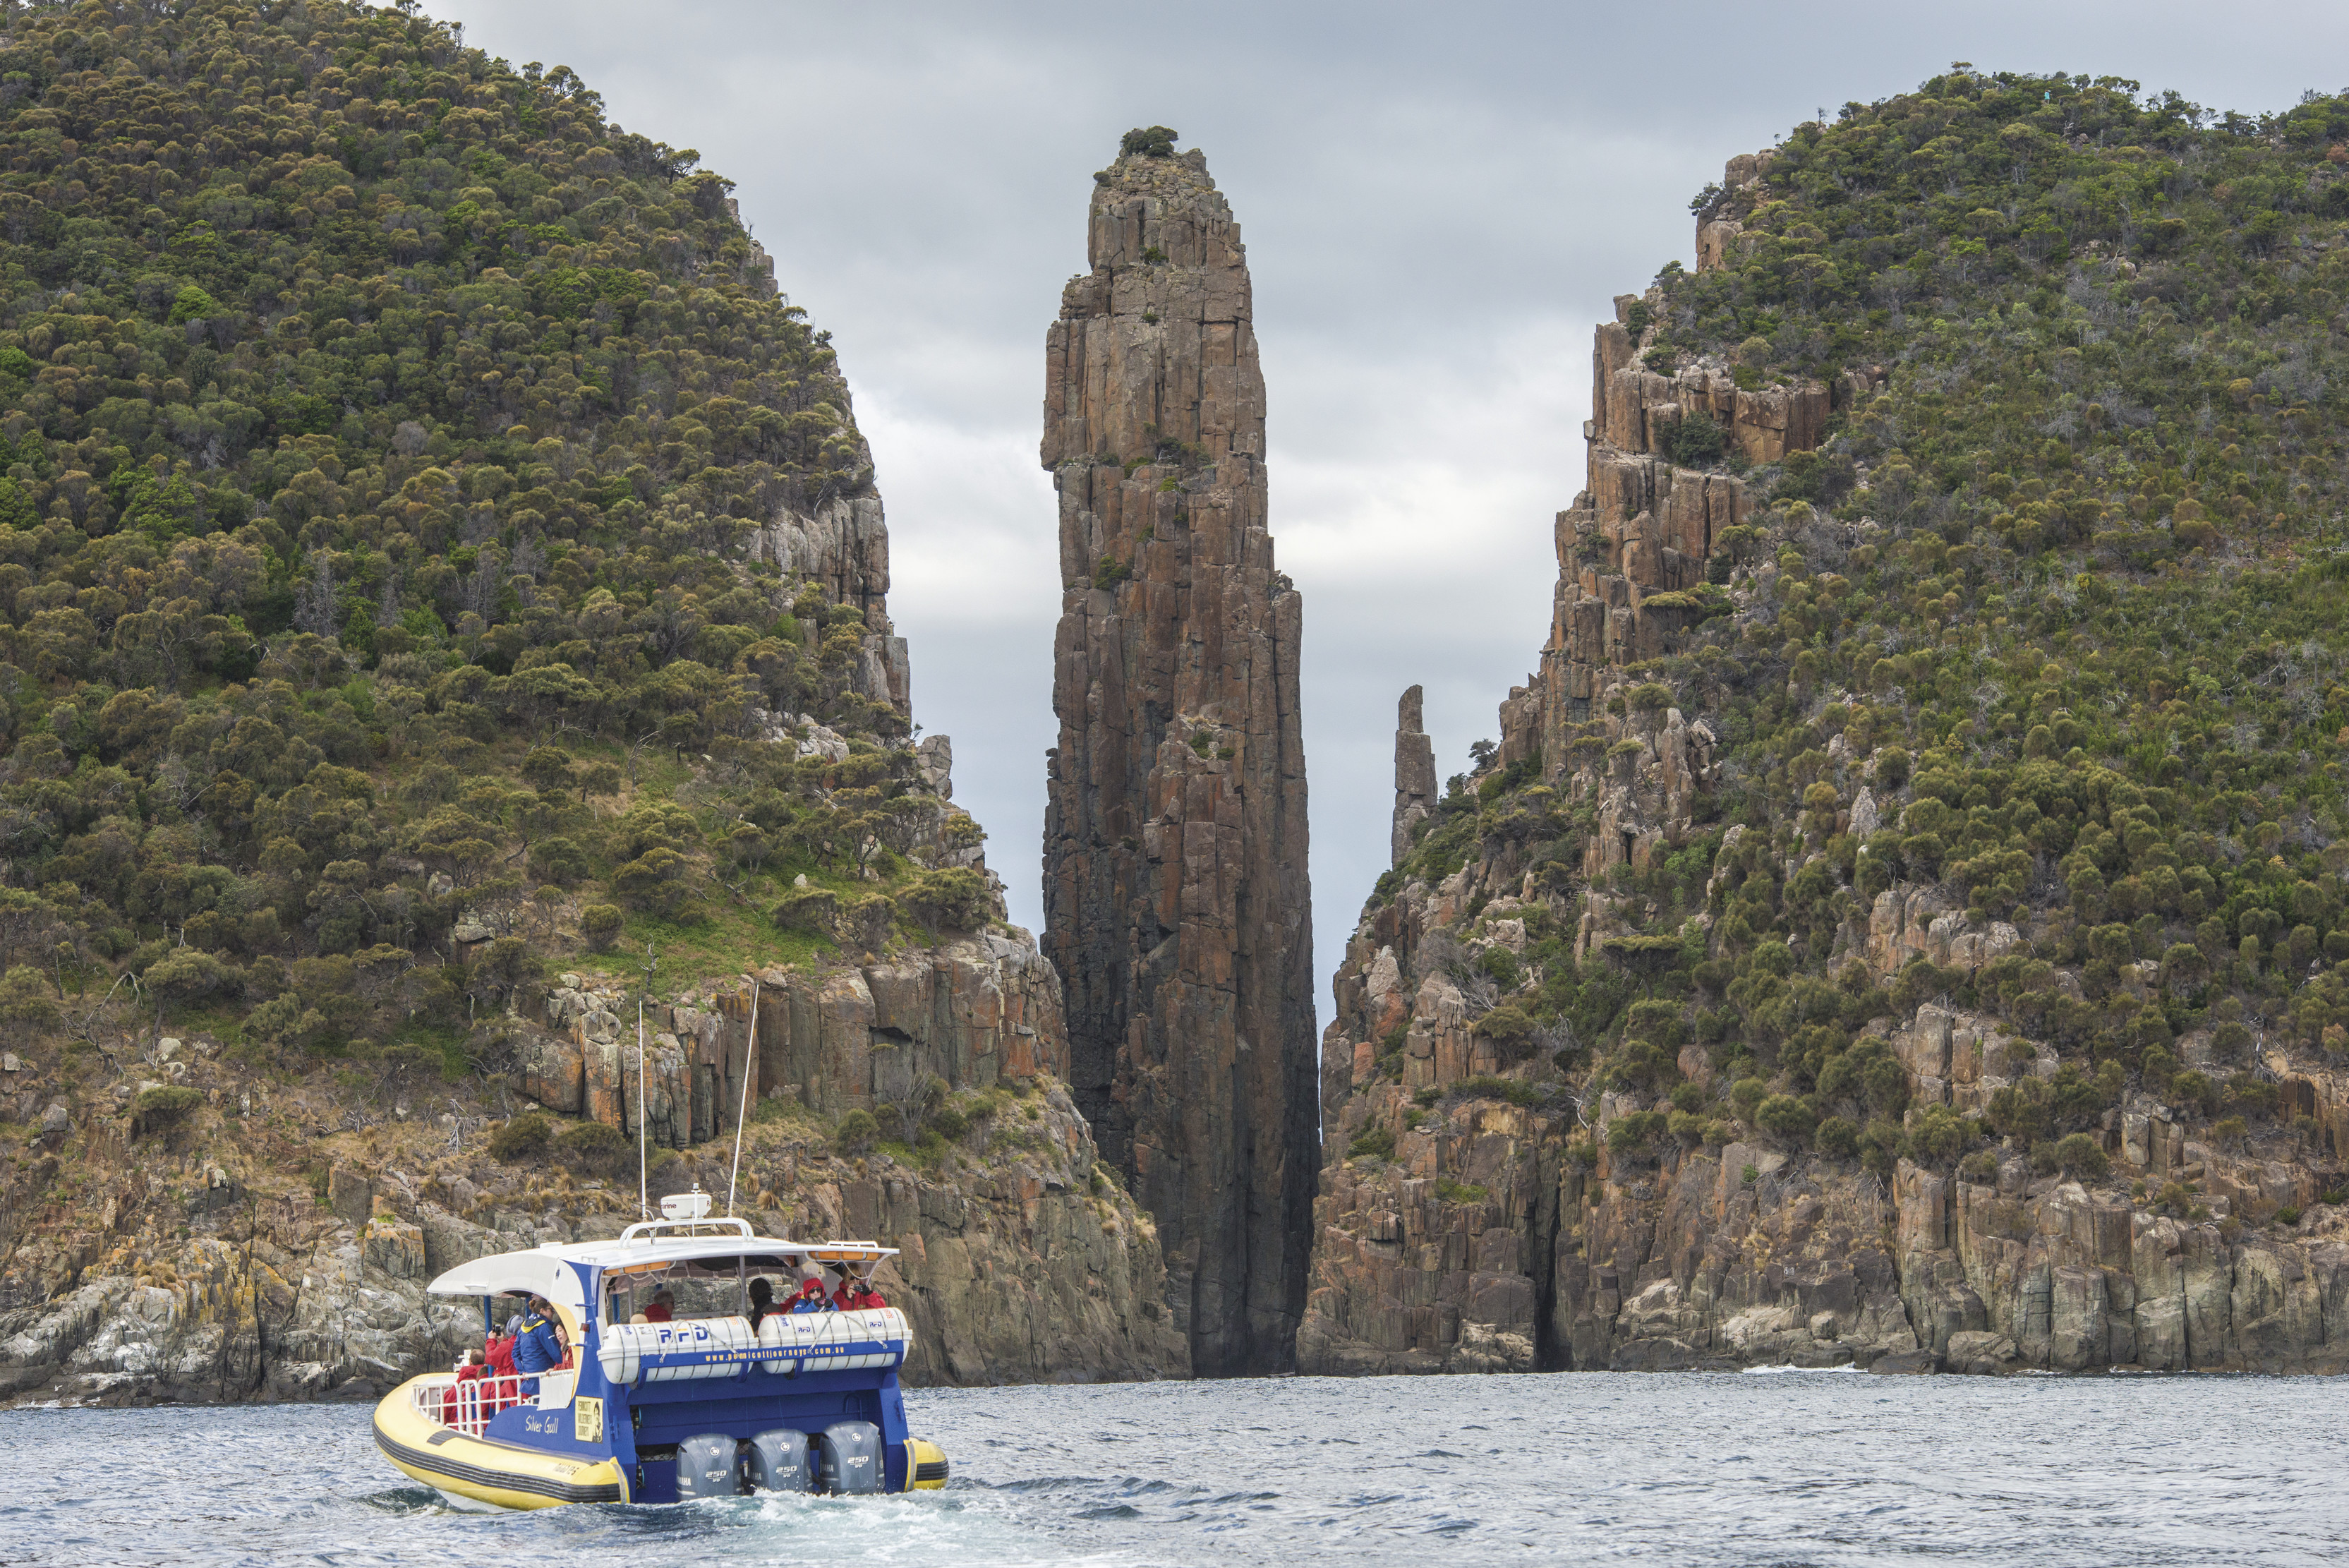 "Incredible image of a boat travelling towards near unbelievable geological formations of the cliffs and lush greenery, with Tasman Island Cruises. "